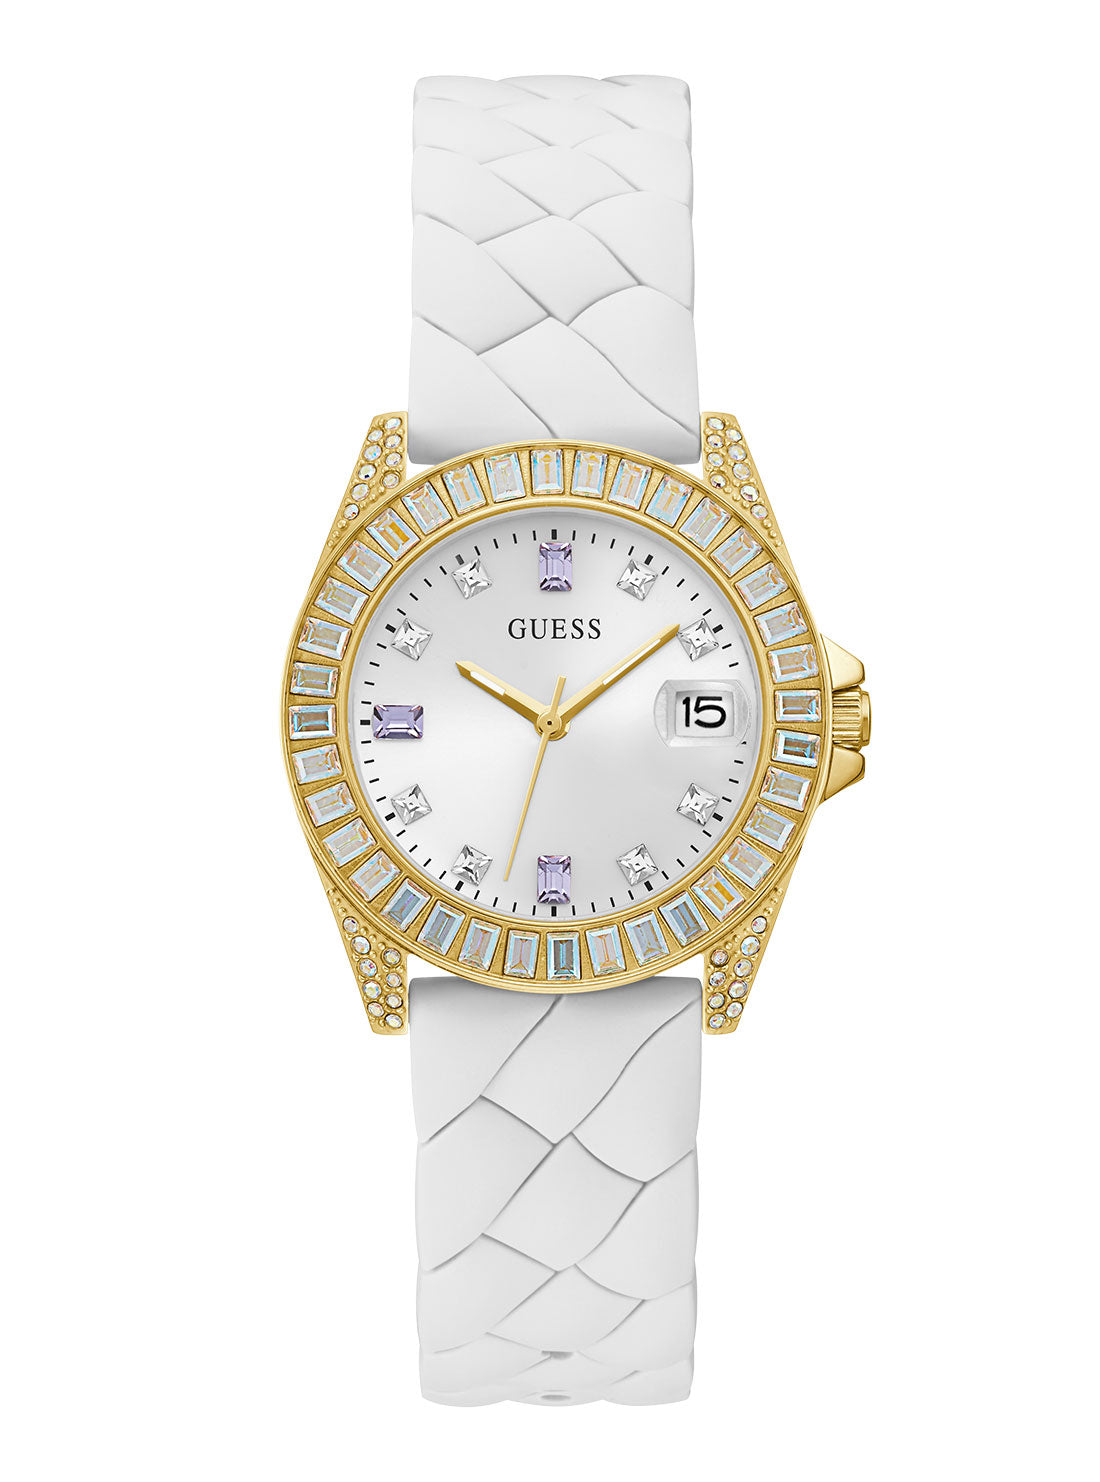 GUESS Women's White Opaline Crystal Silicone Watch GW0585L2 Front View